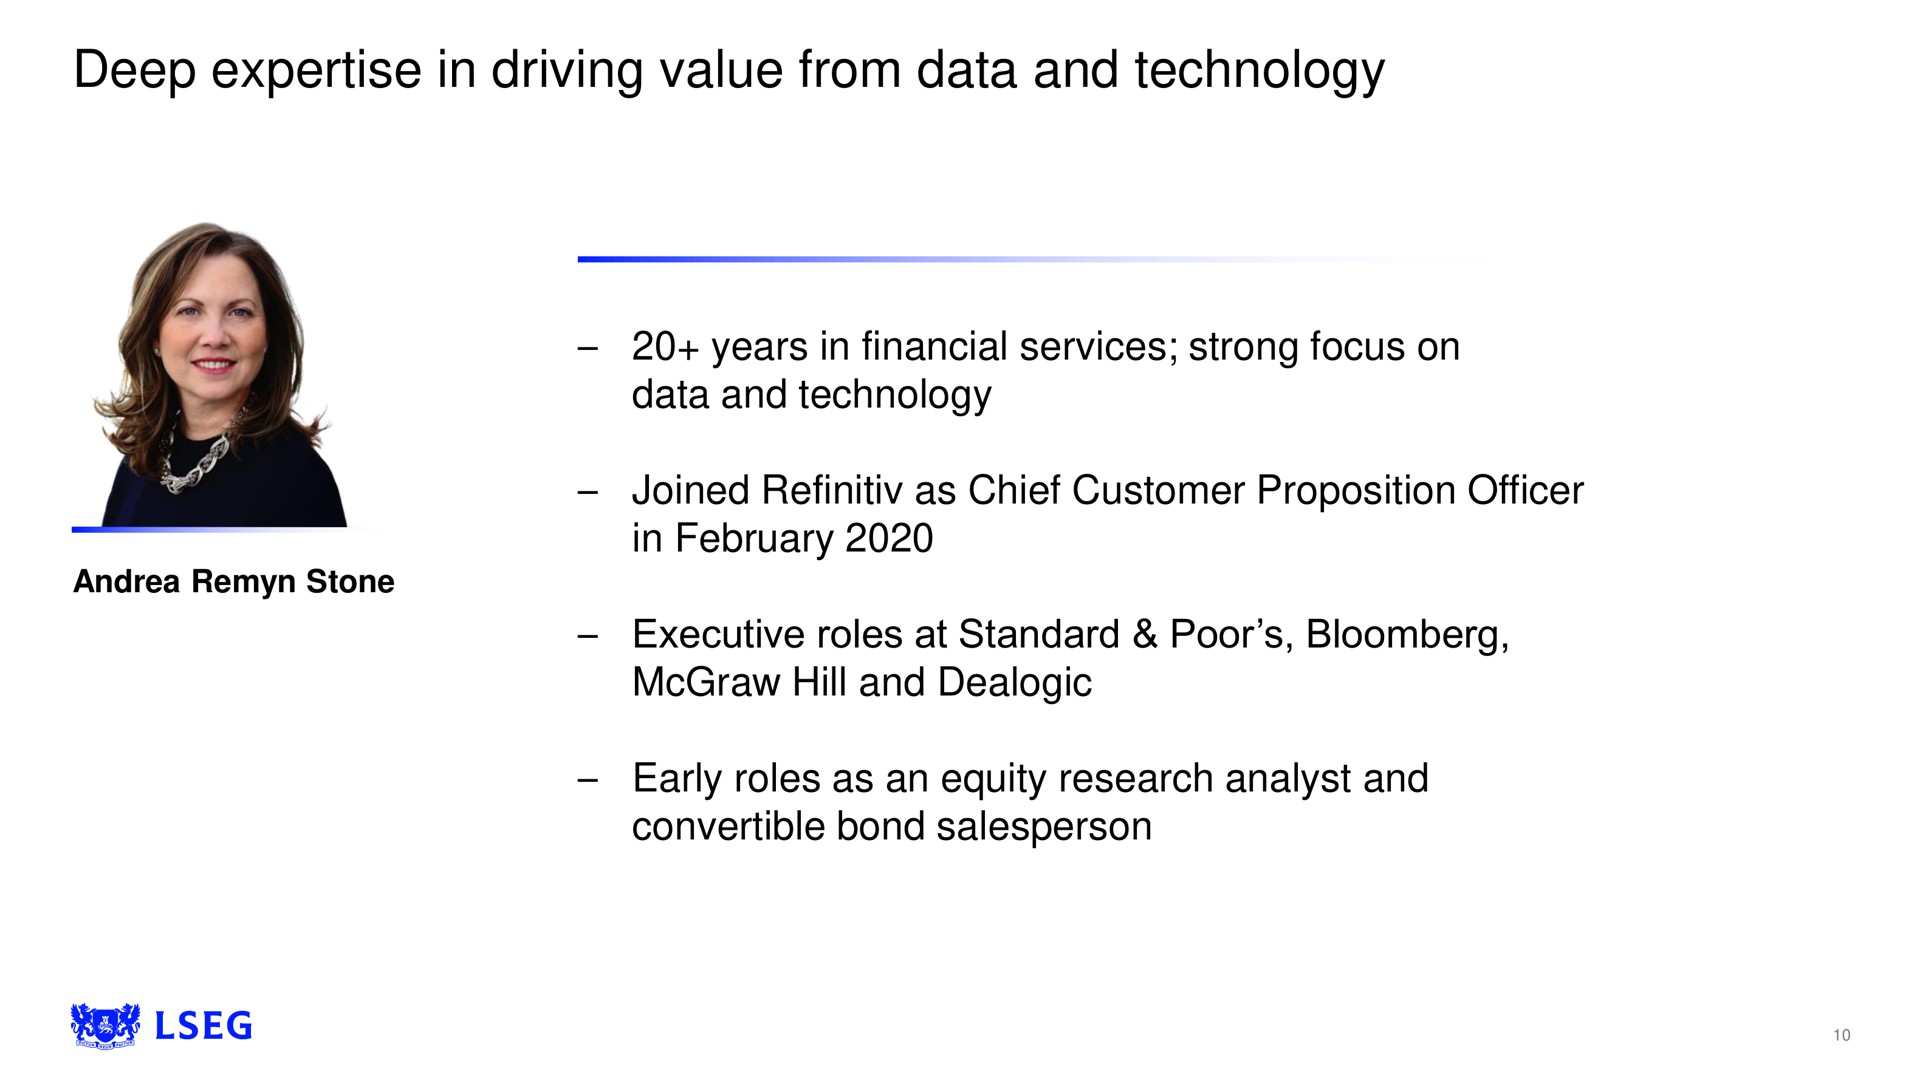 deep in driving value from data and technology joined as chief customer proposition officer | LSE